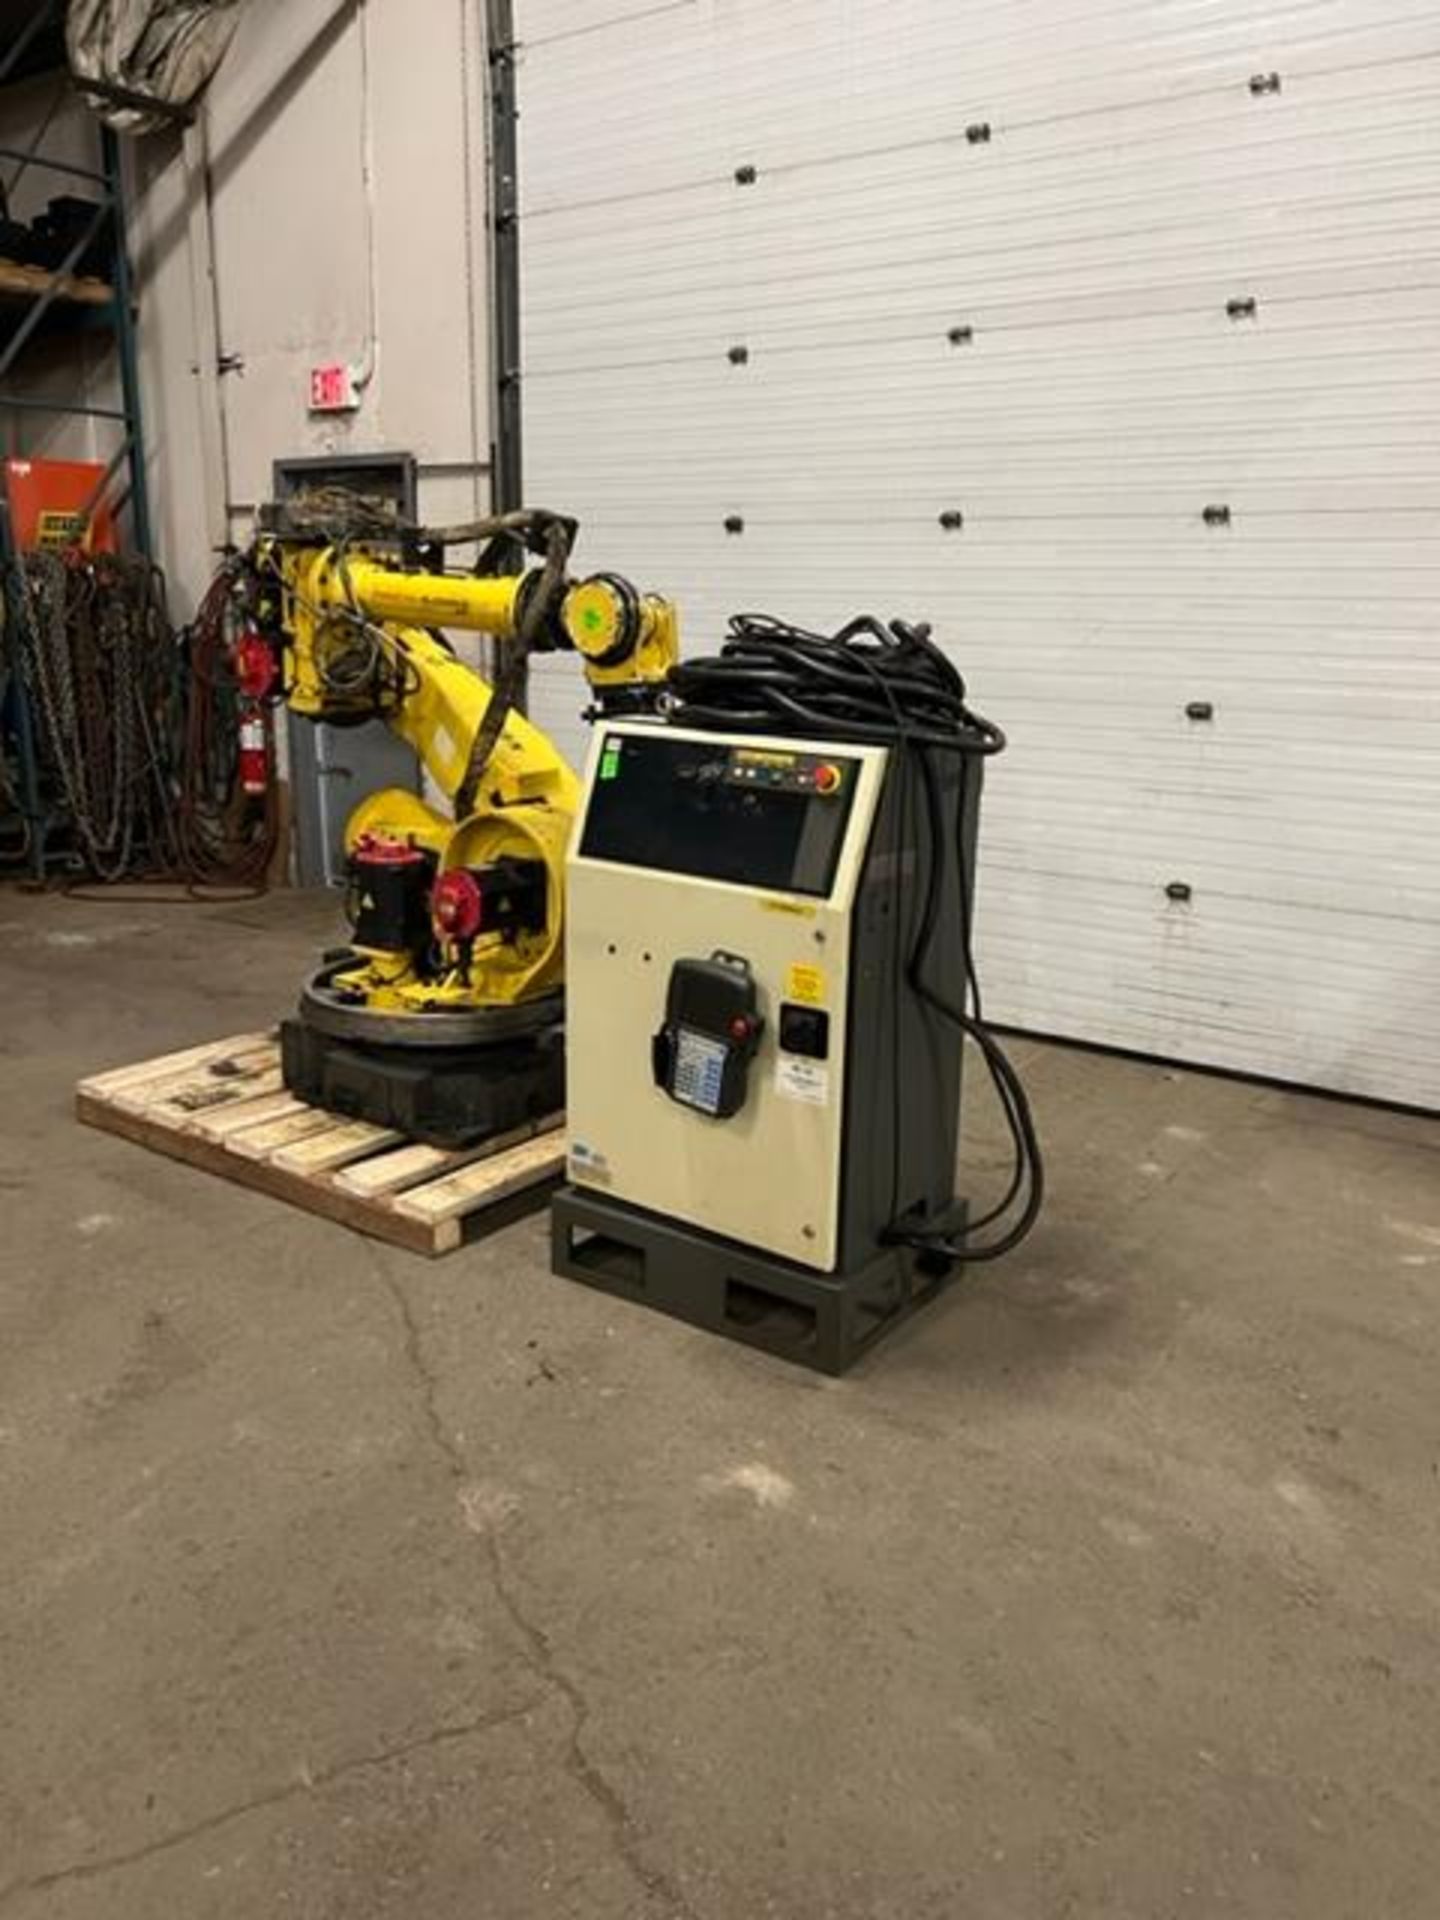 MINT Fanuc Handling Robot Model R-2000iA 165F - 165kg payload with R-J3iB Controller and pendant - Image 4 of 5